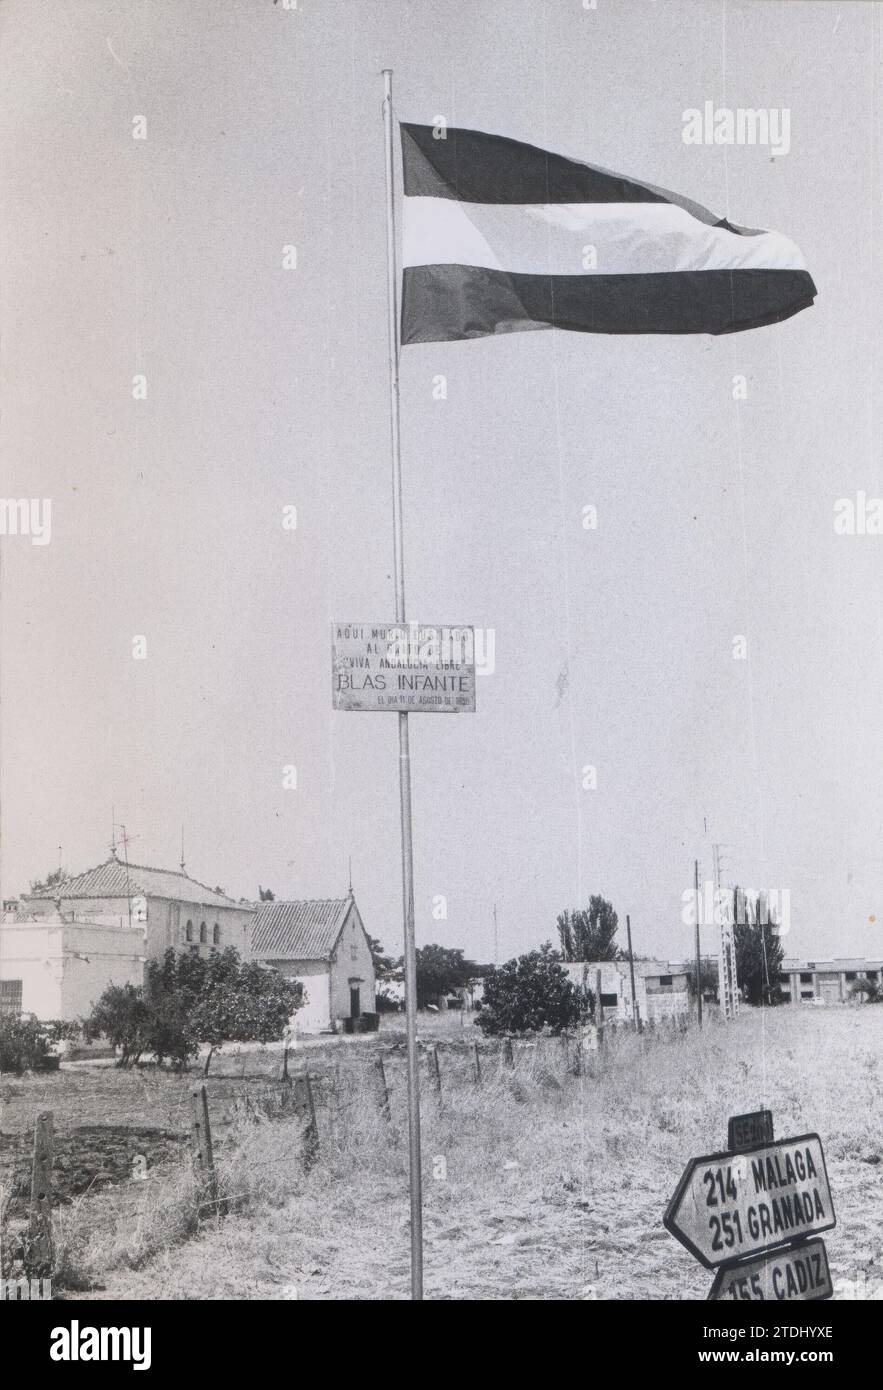 In August 1976, tribute was paid to Blas Infante for the first time at kilometer four of the Carmona highway. As it appears on the left, a small sign remembers that he was shot there. On the right, Abc cover from December 4, 1977 in which a child carries the flag of Andalusia in front of the Ronda pit. Credit: Album / Archivo ABC / Doblado Stock Photo